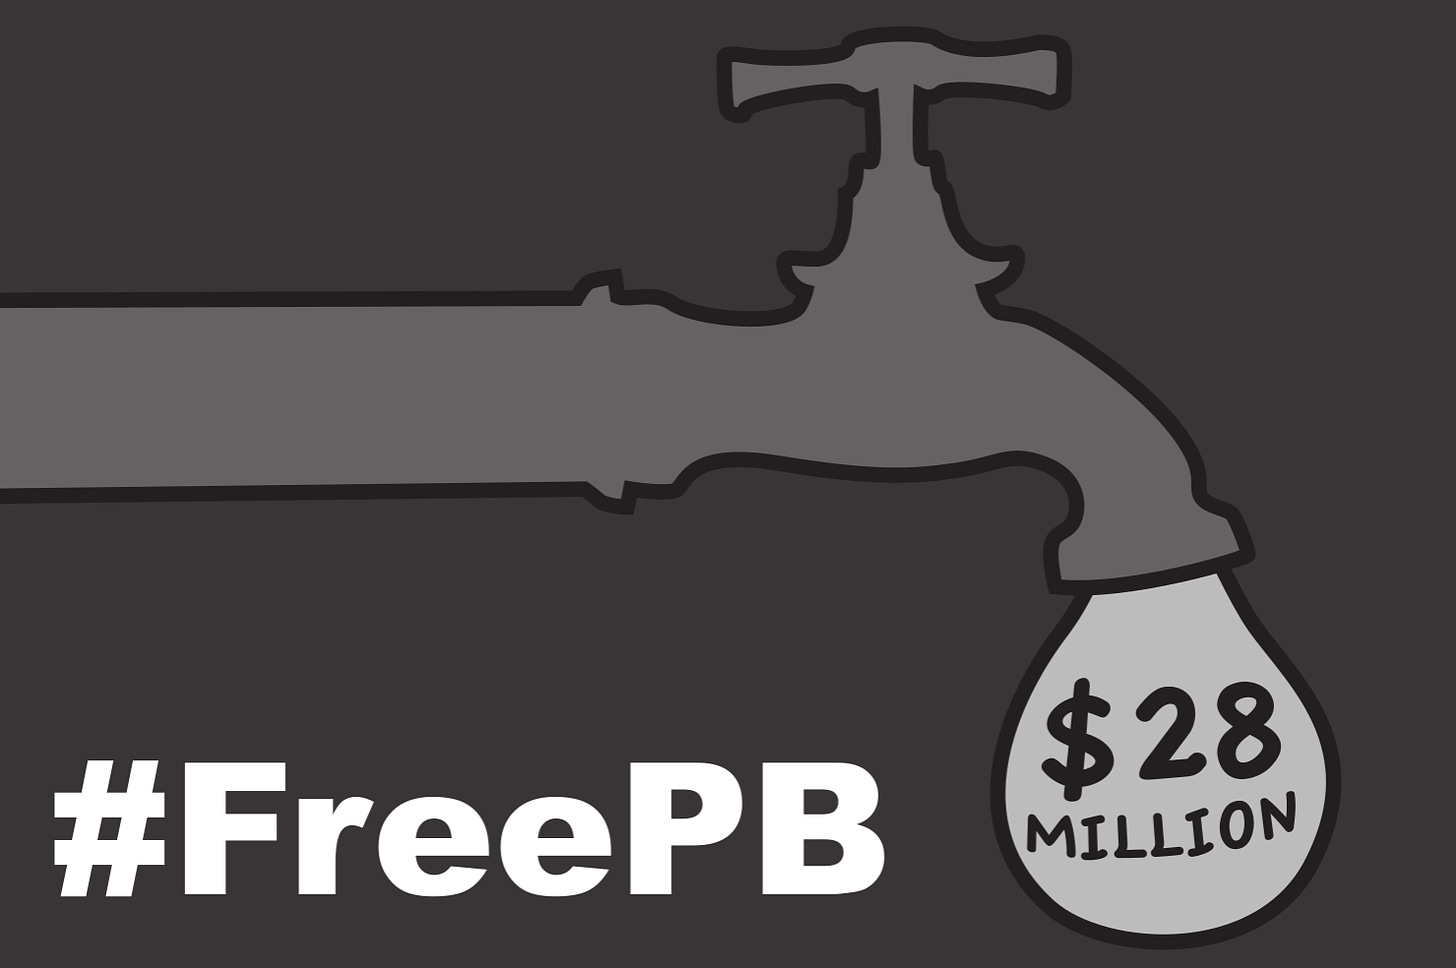 A silouette of a water faucet about to gush forth. "$28 million" is written inside a large water drop. #FreePB is written below.